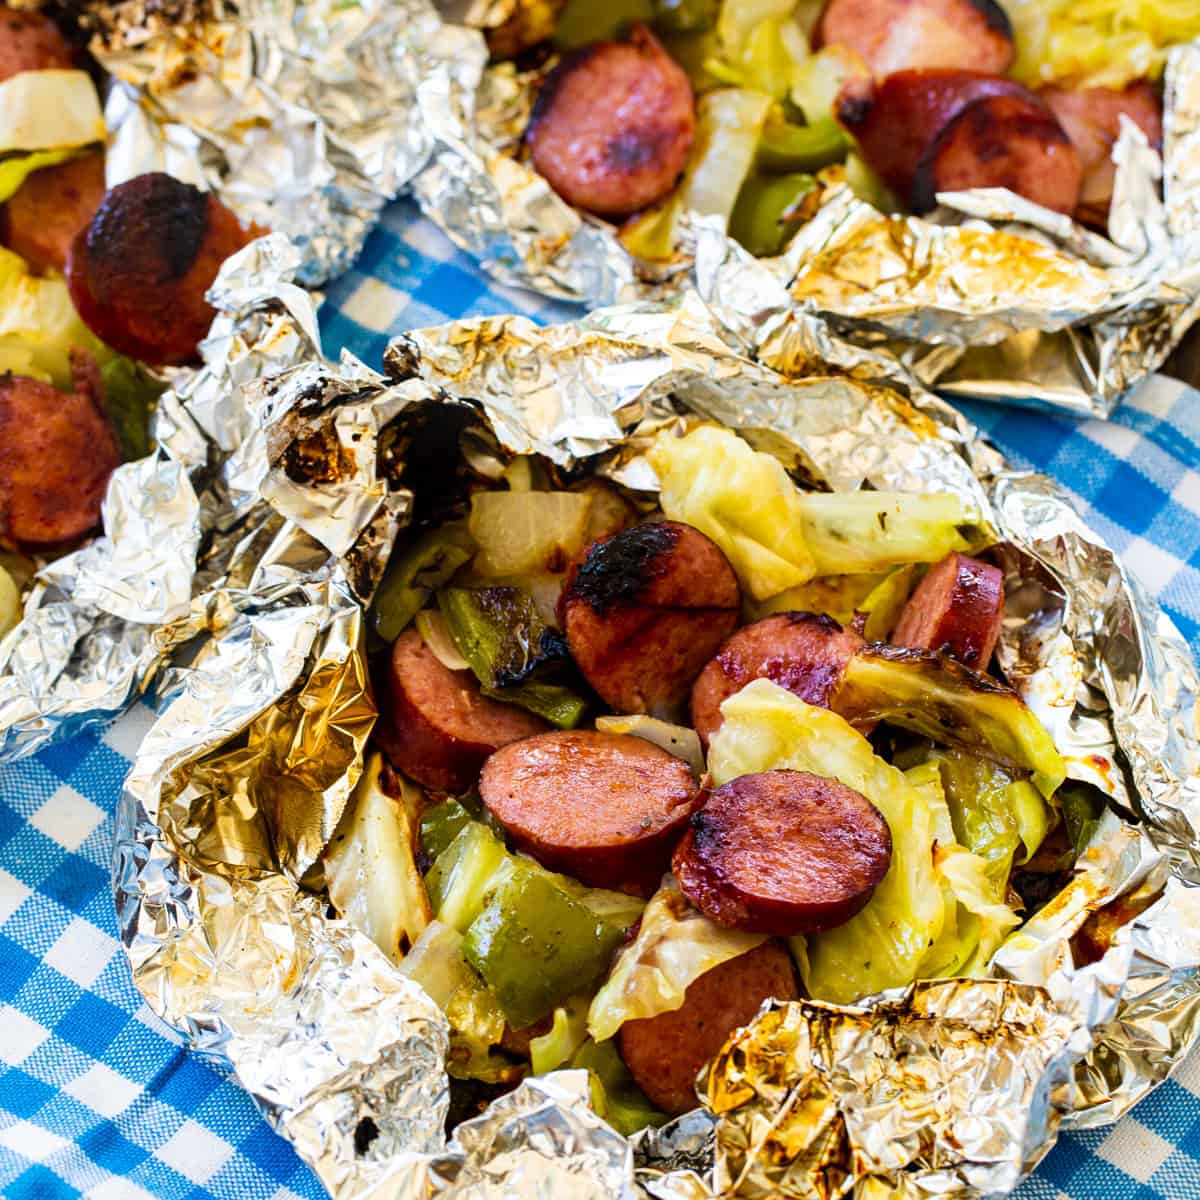 Keto Cabbage and Sausage Foil Packs on a blue and white cloth napkin.